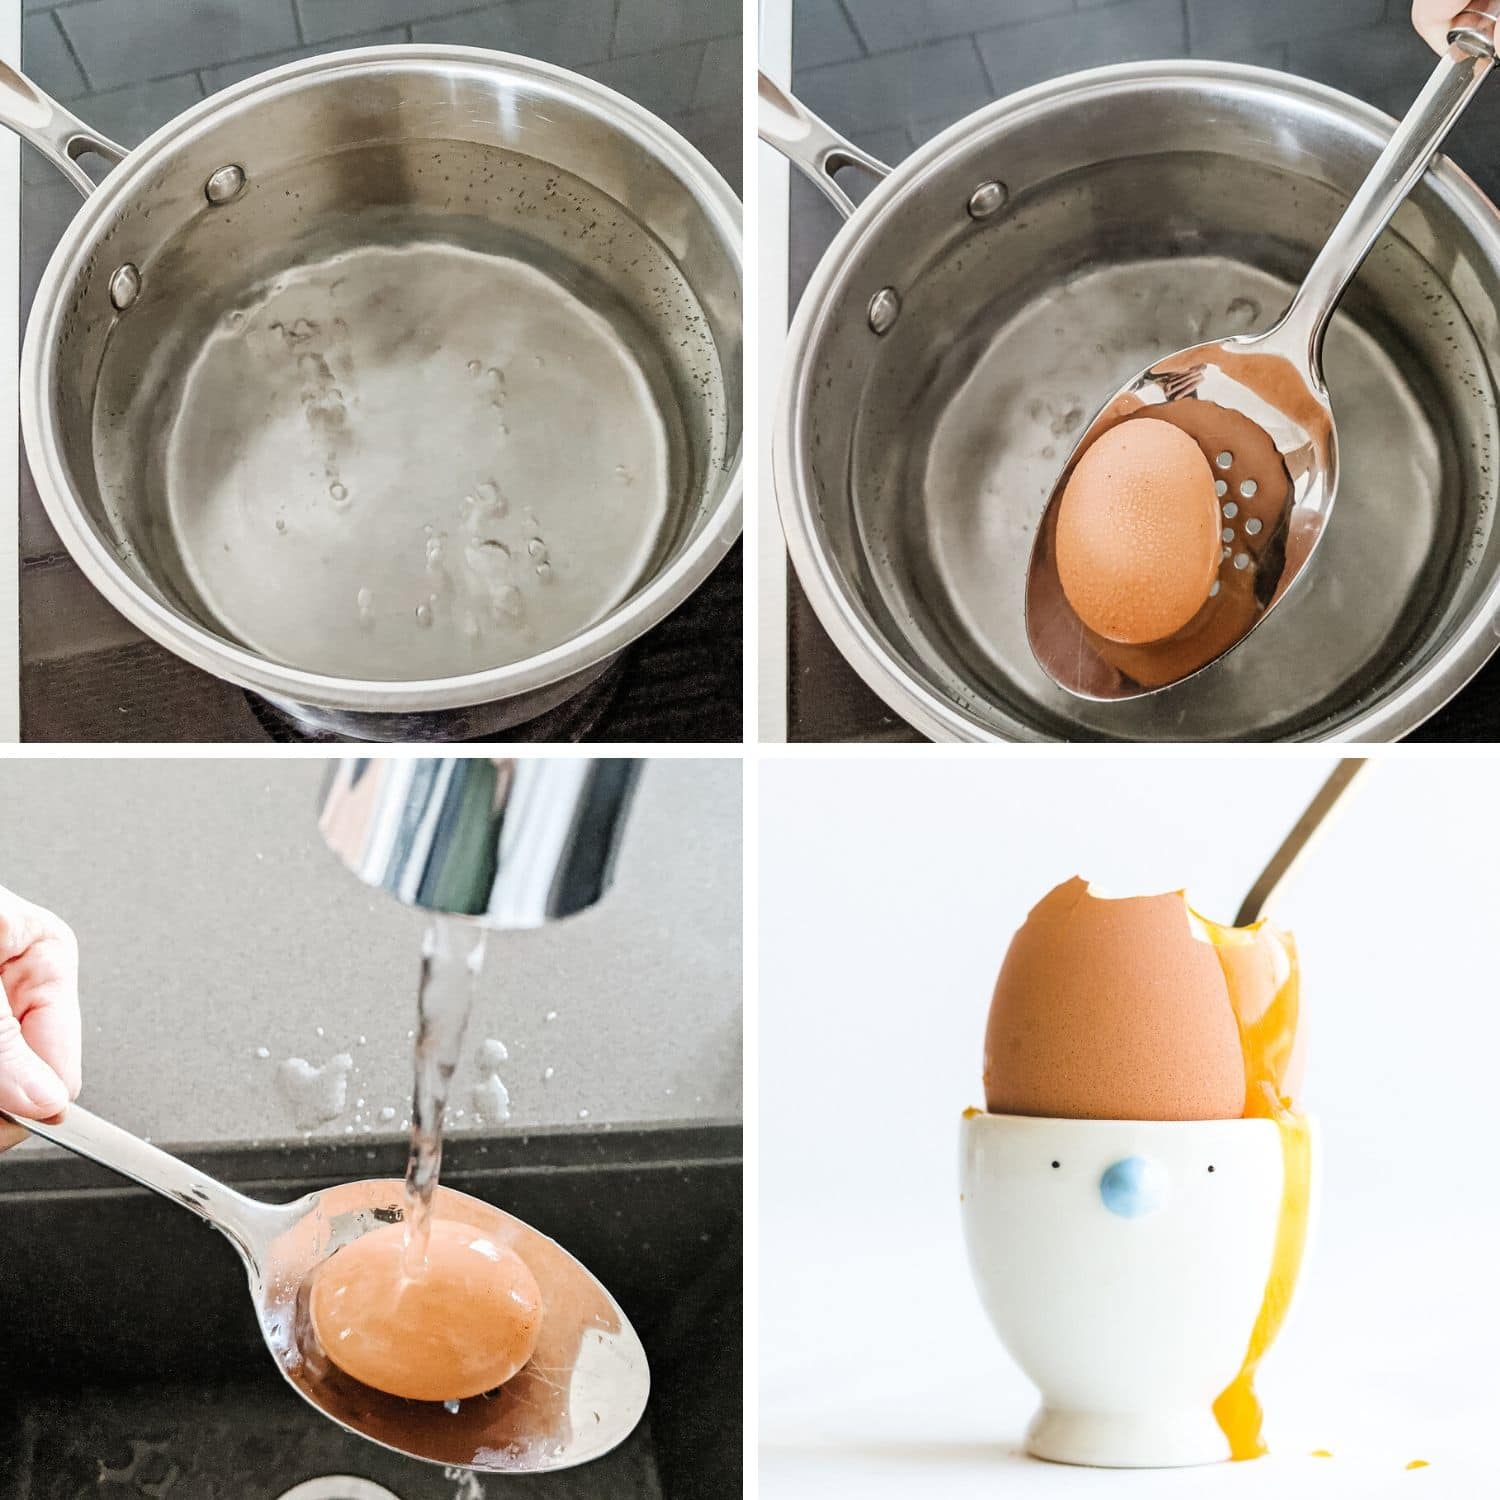 Collage of photos showing how to make a soft boiled egg on the stovetop.